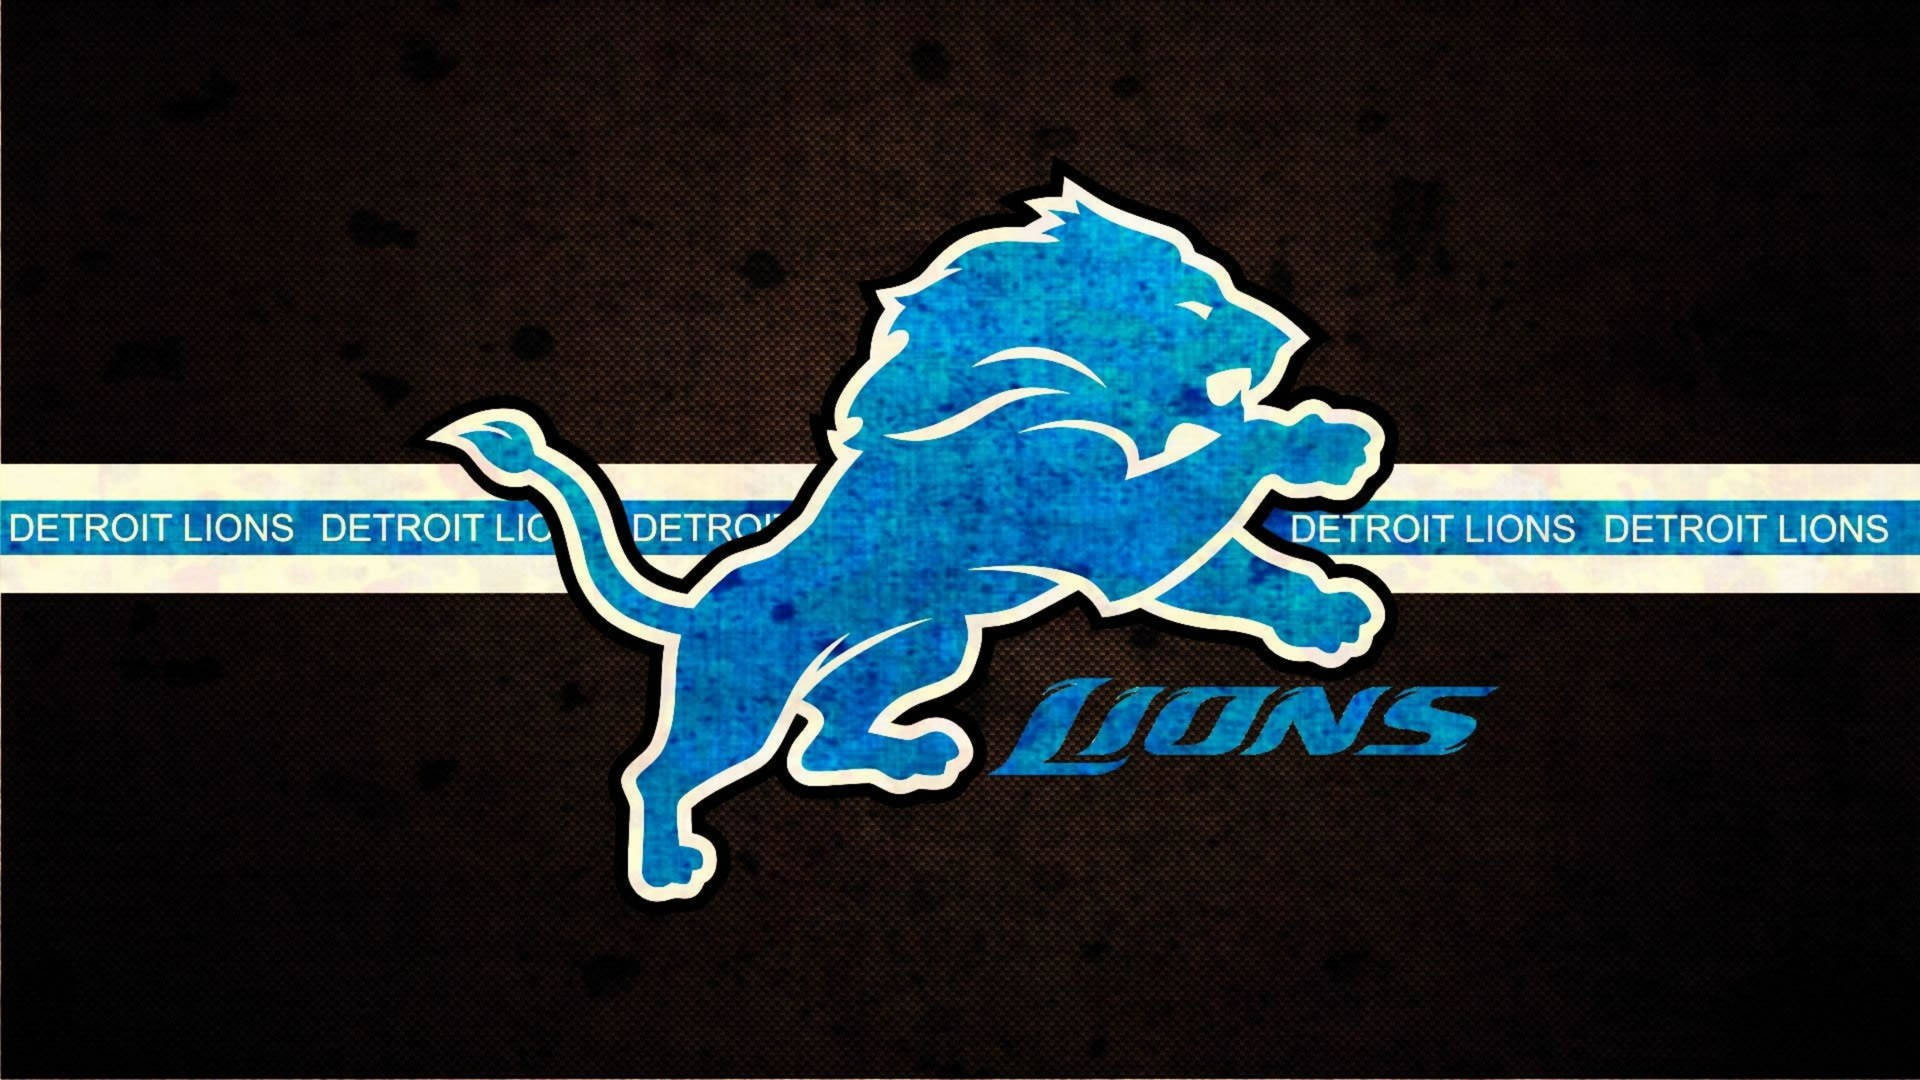 Detroit Lions Nfl Team In Action Background